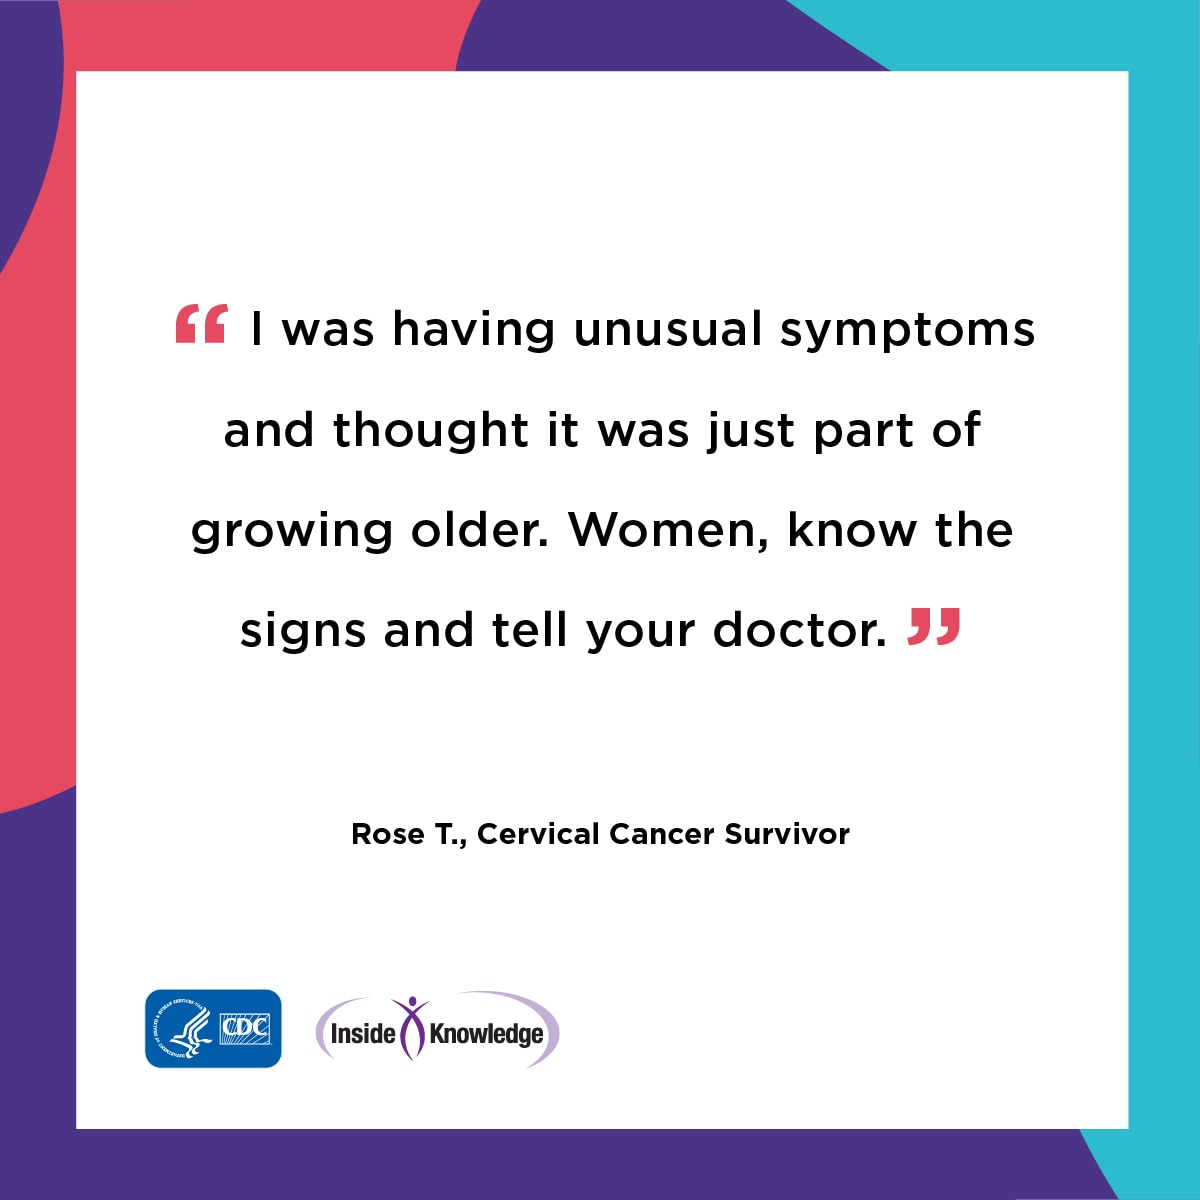 I was having unusual symptoms and thought it was just part of growing older. Women, know the signs and tell your doctor. Rose T. Cervical Cancer Survivor